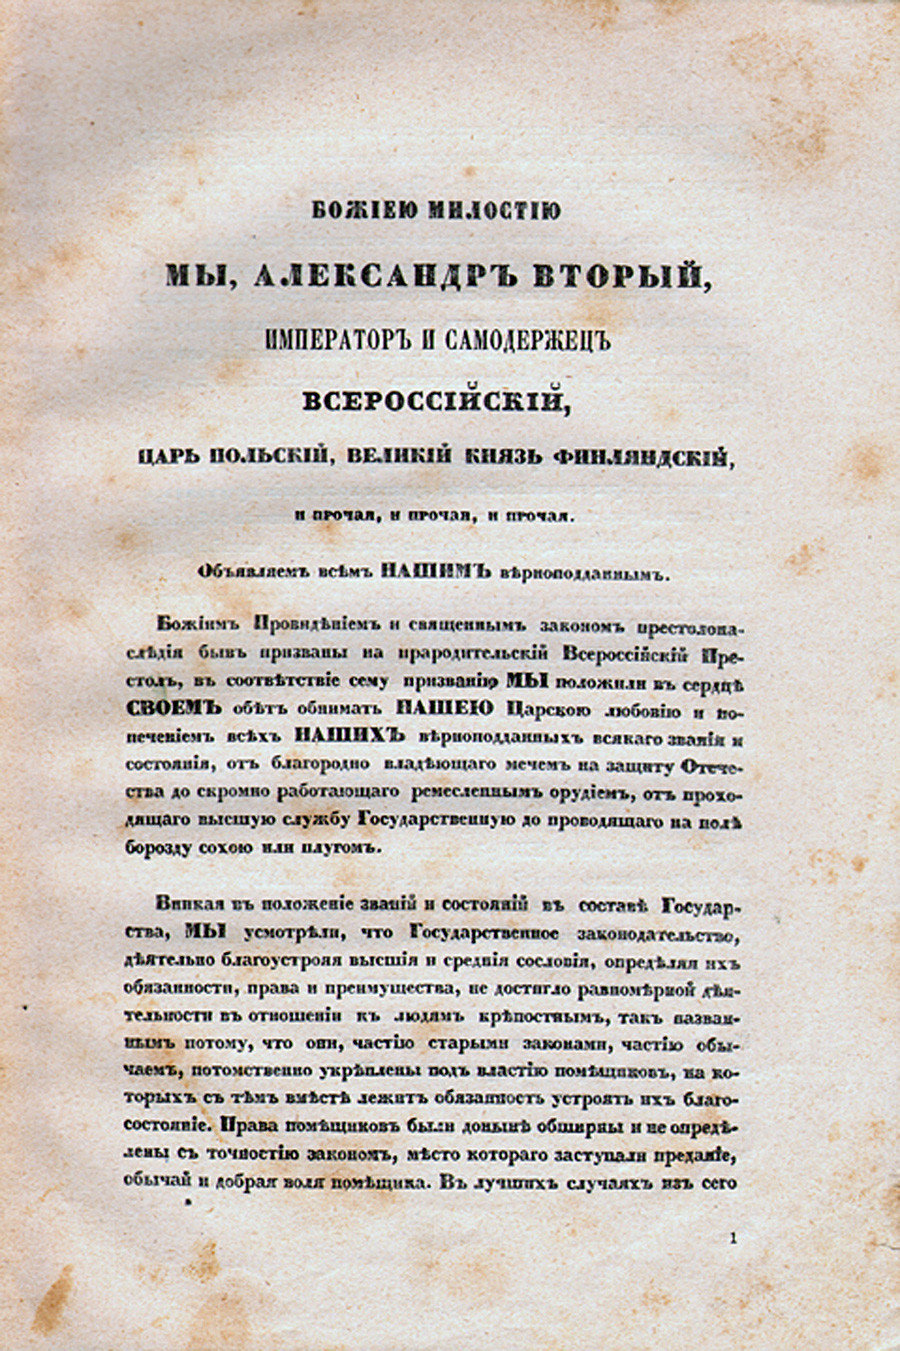 The first page of the Manifesto of February 19, 1861